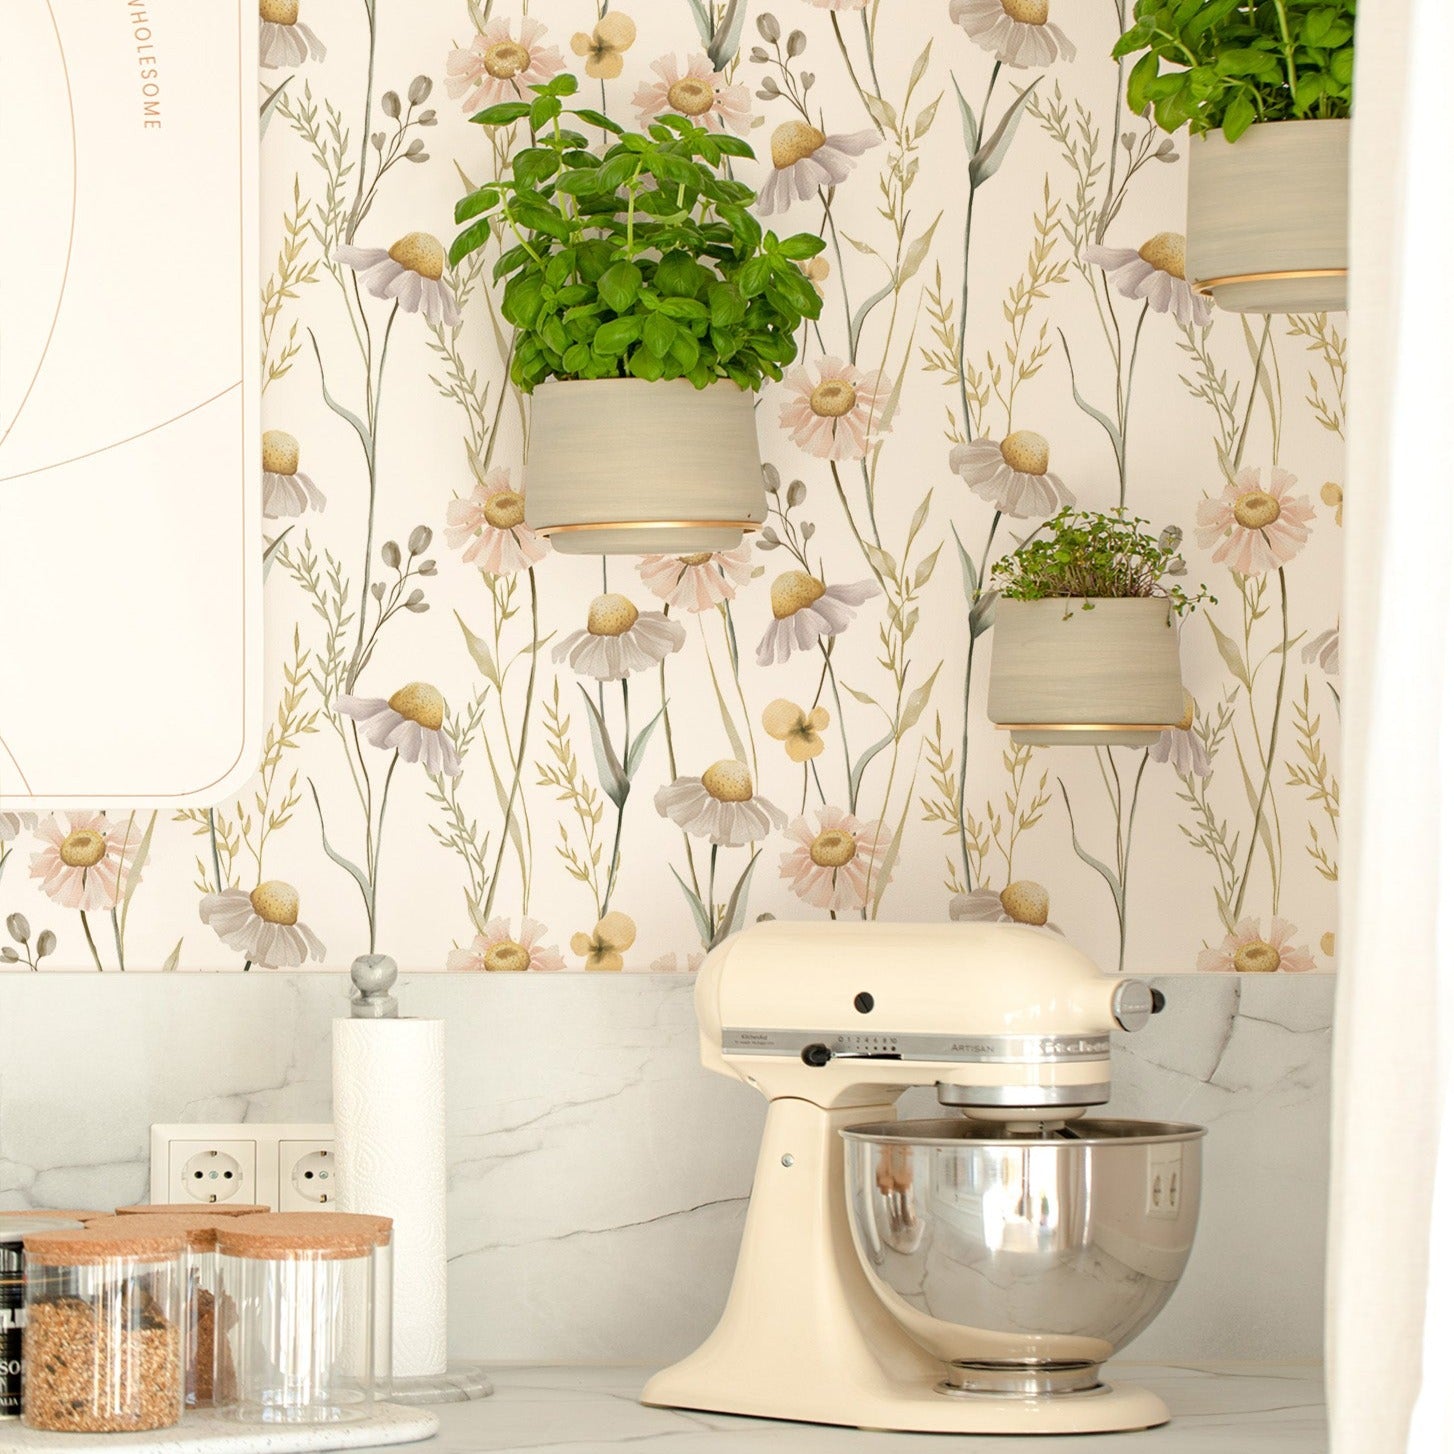 A well-lit kitchen corner featuring the Watercolour Daisy Wallpaper, which brings a light and airy floral aesthetic to the space. Hanging plants and a stylish kitchen mixer on the countertop reflect a blend of functionality and natural beauty.